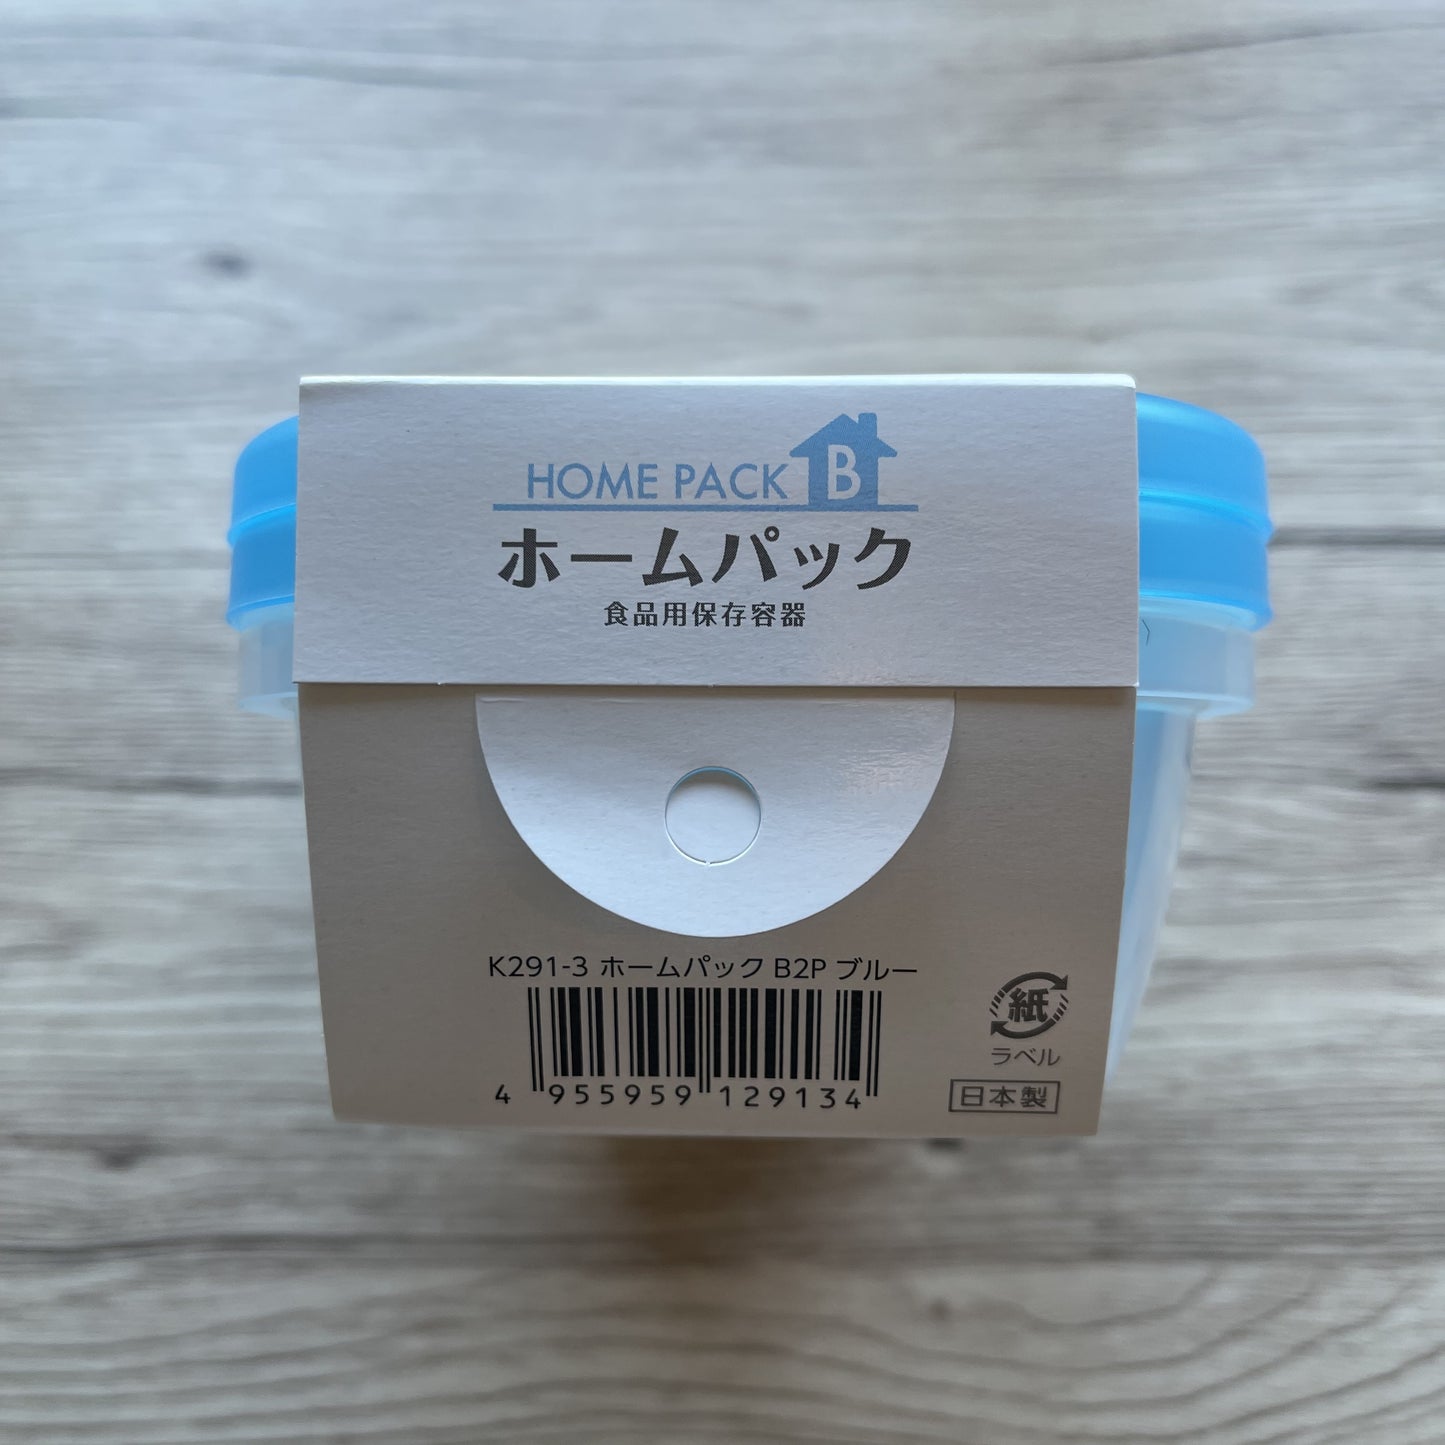 Microwave Container 500mlx2 Pcs (Made in Japan)